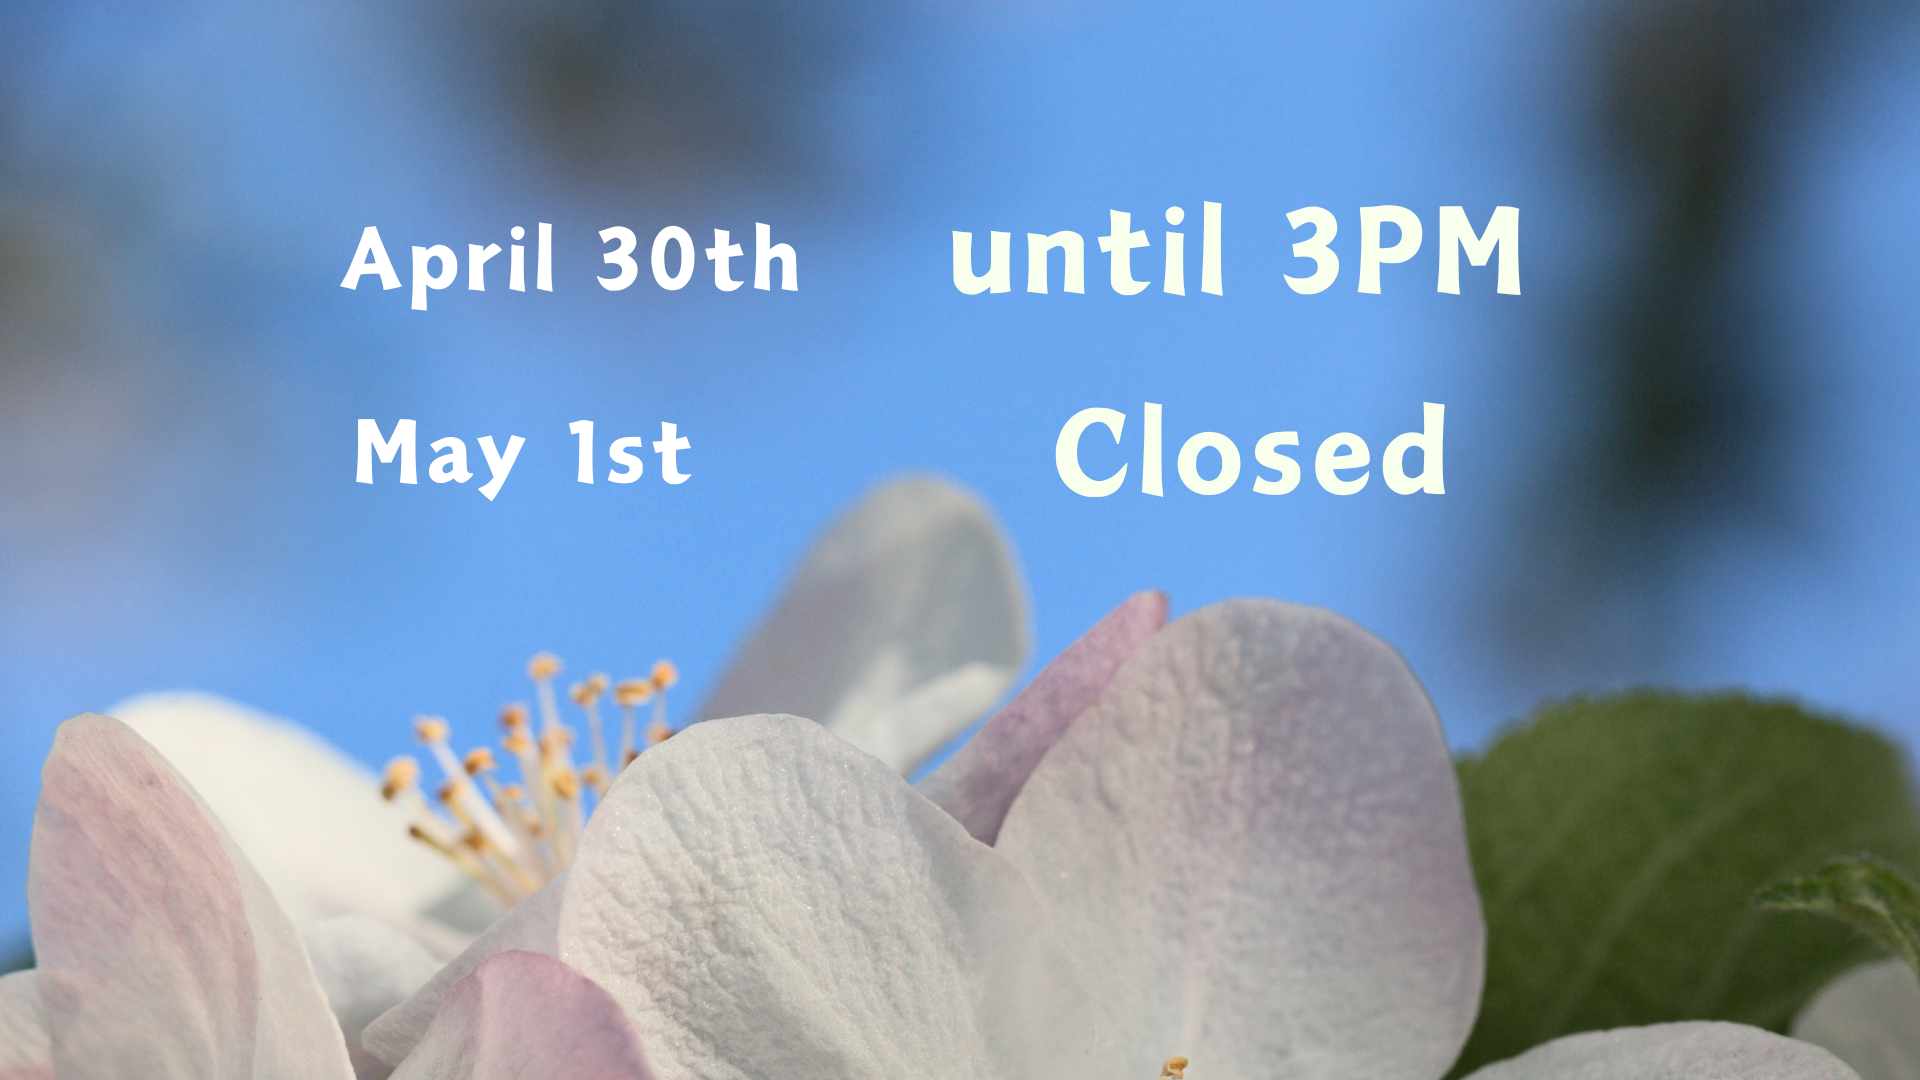 Library working hours. April 30th - until 3PM. May 1st - closed